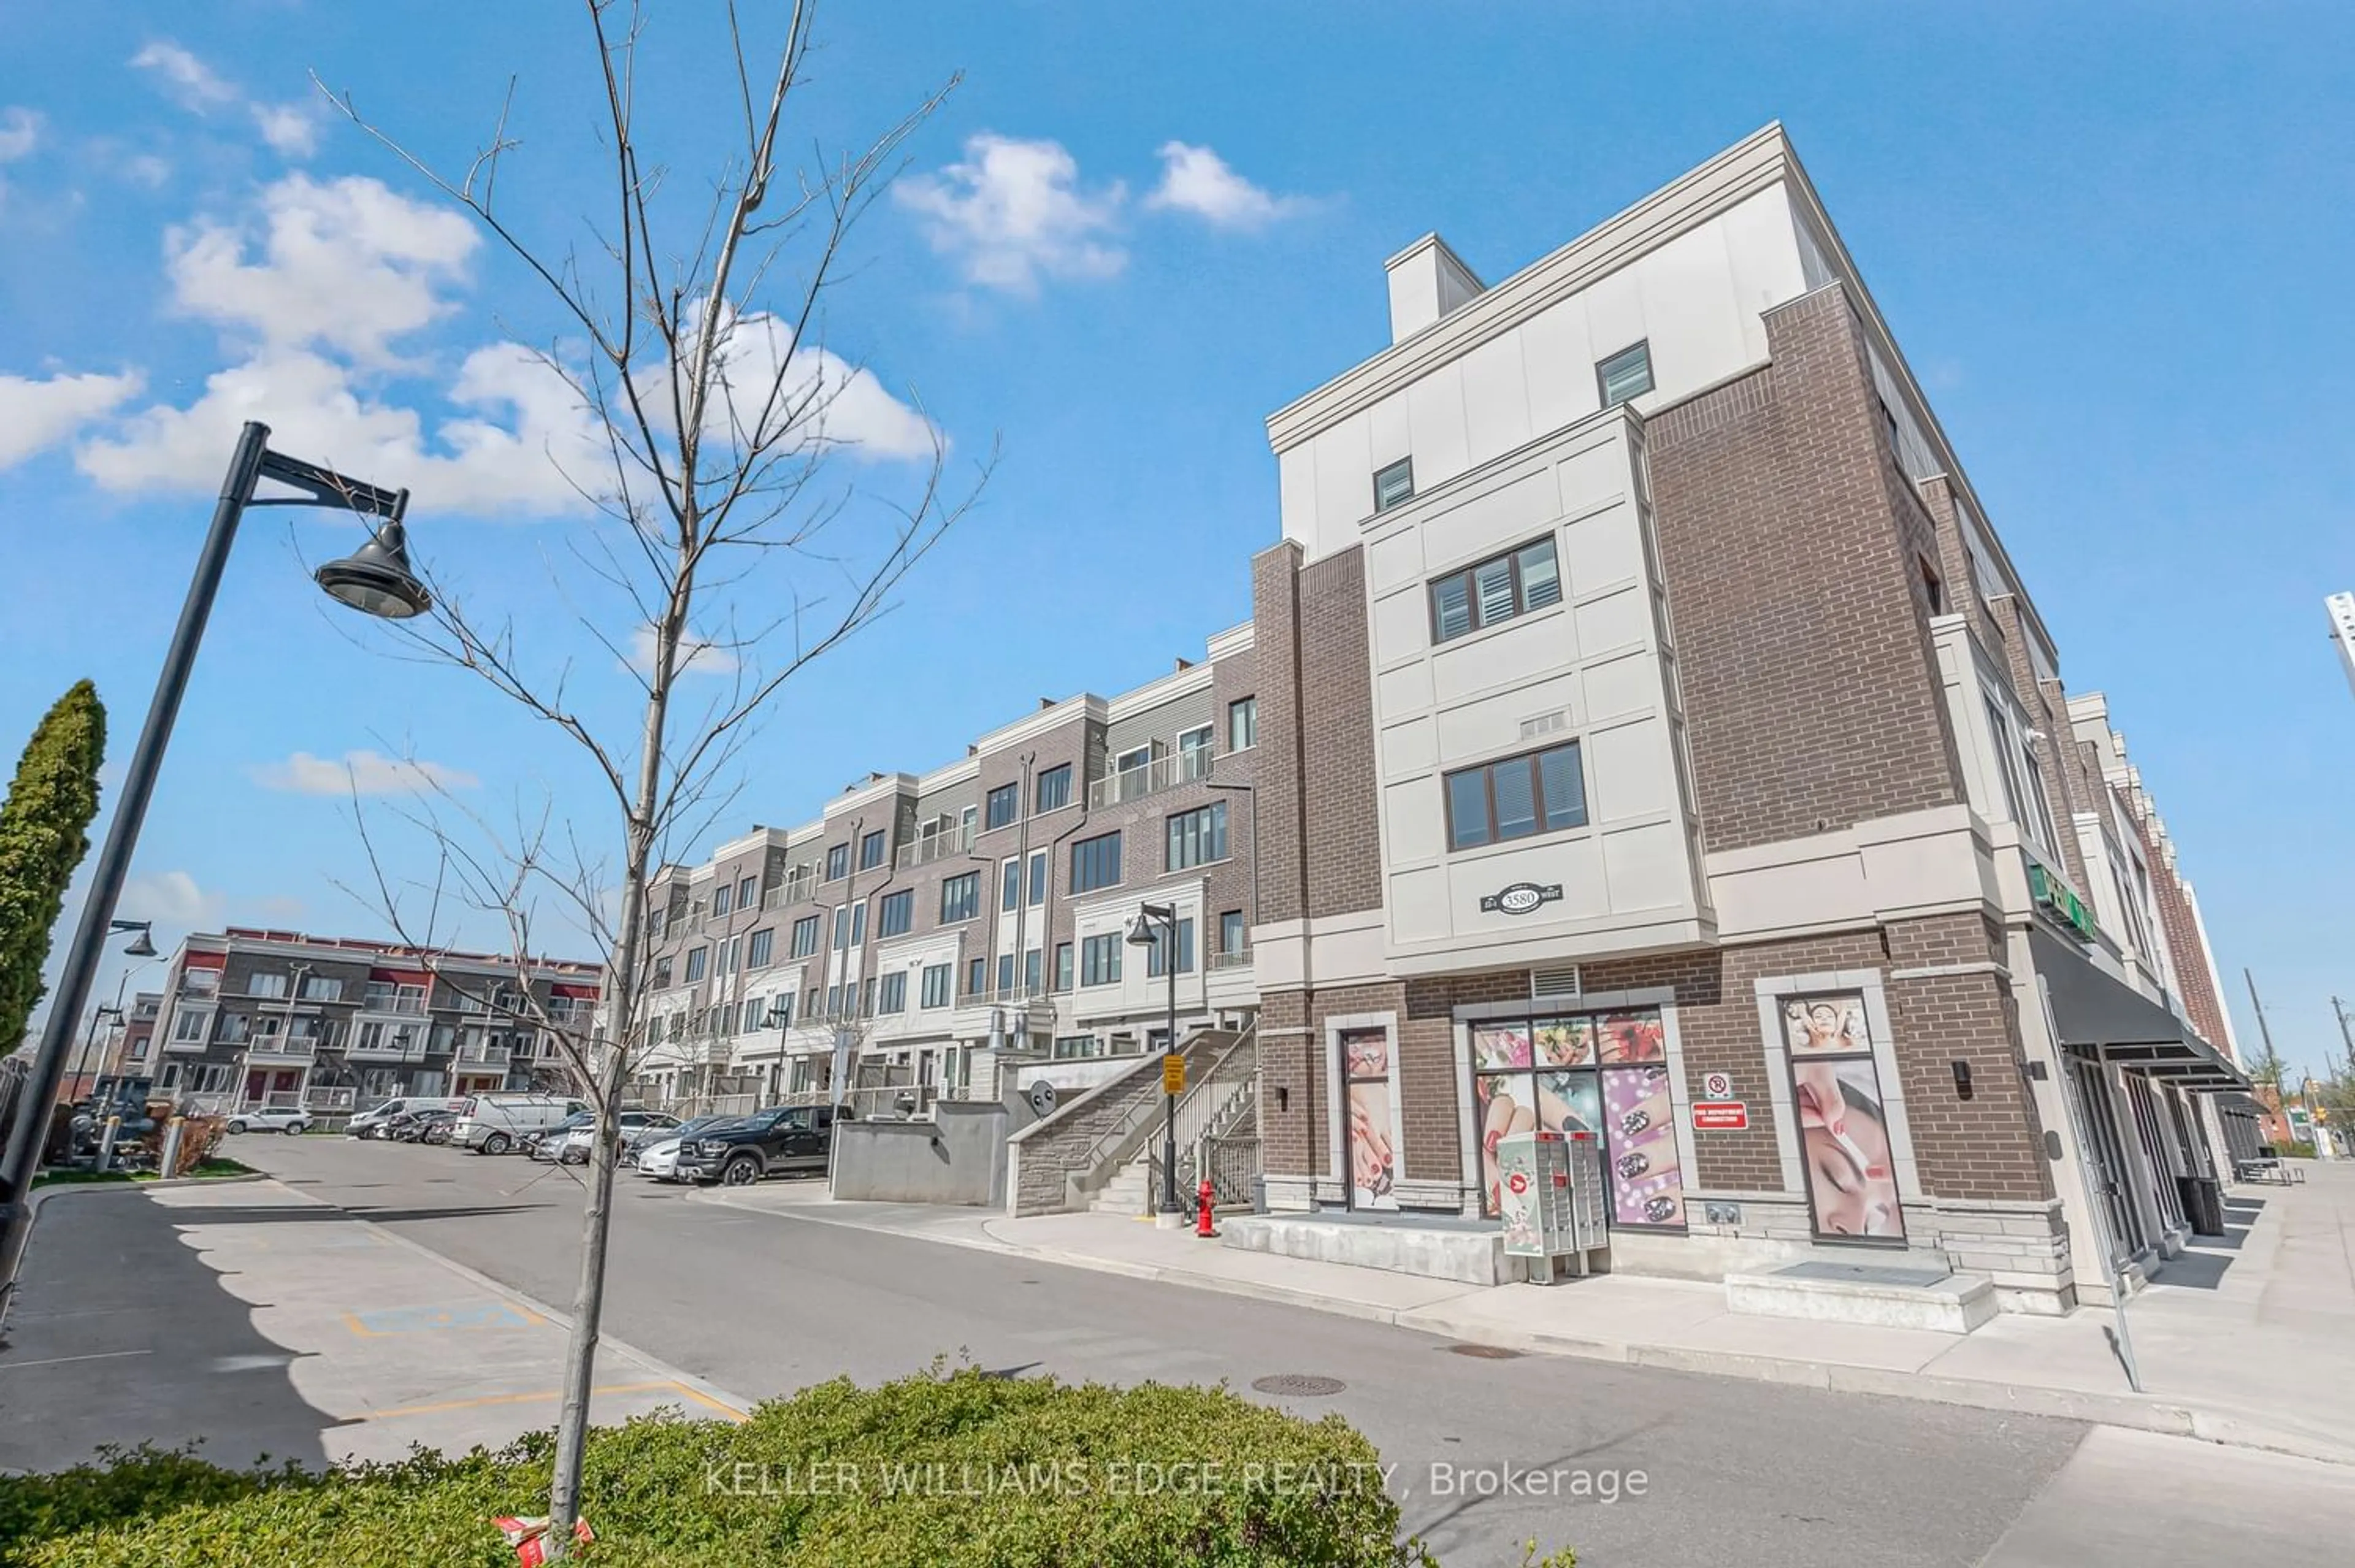 A pic from exterior of the house or condo for 3580 Lake Shore Blvd #6, Toronto Ontario M8W 1N6